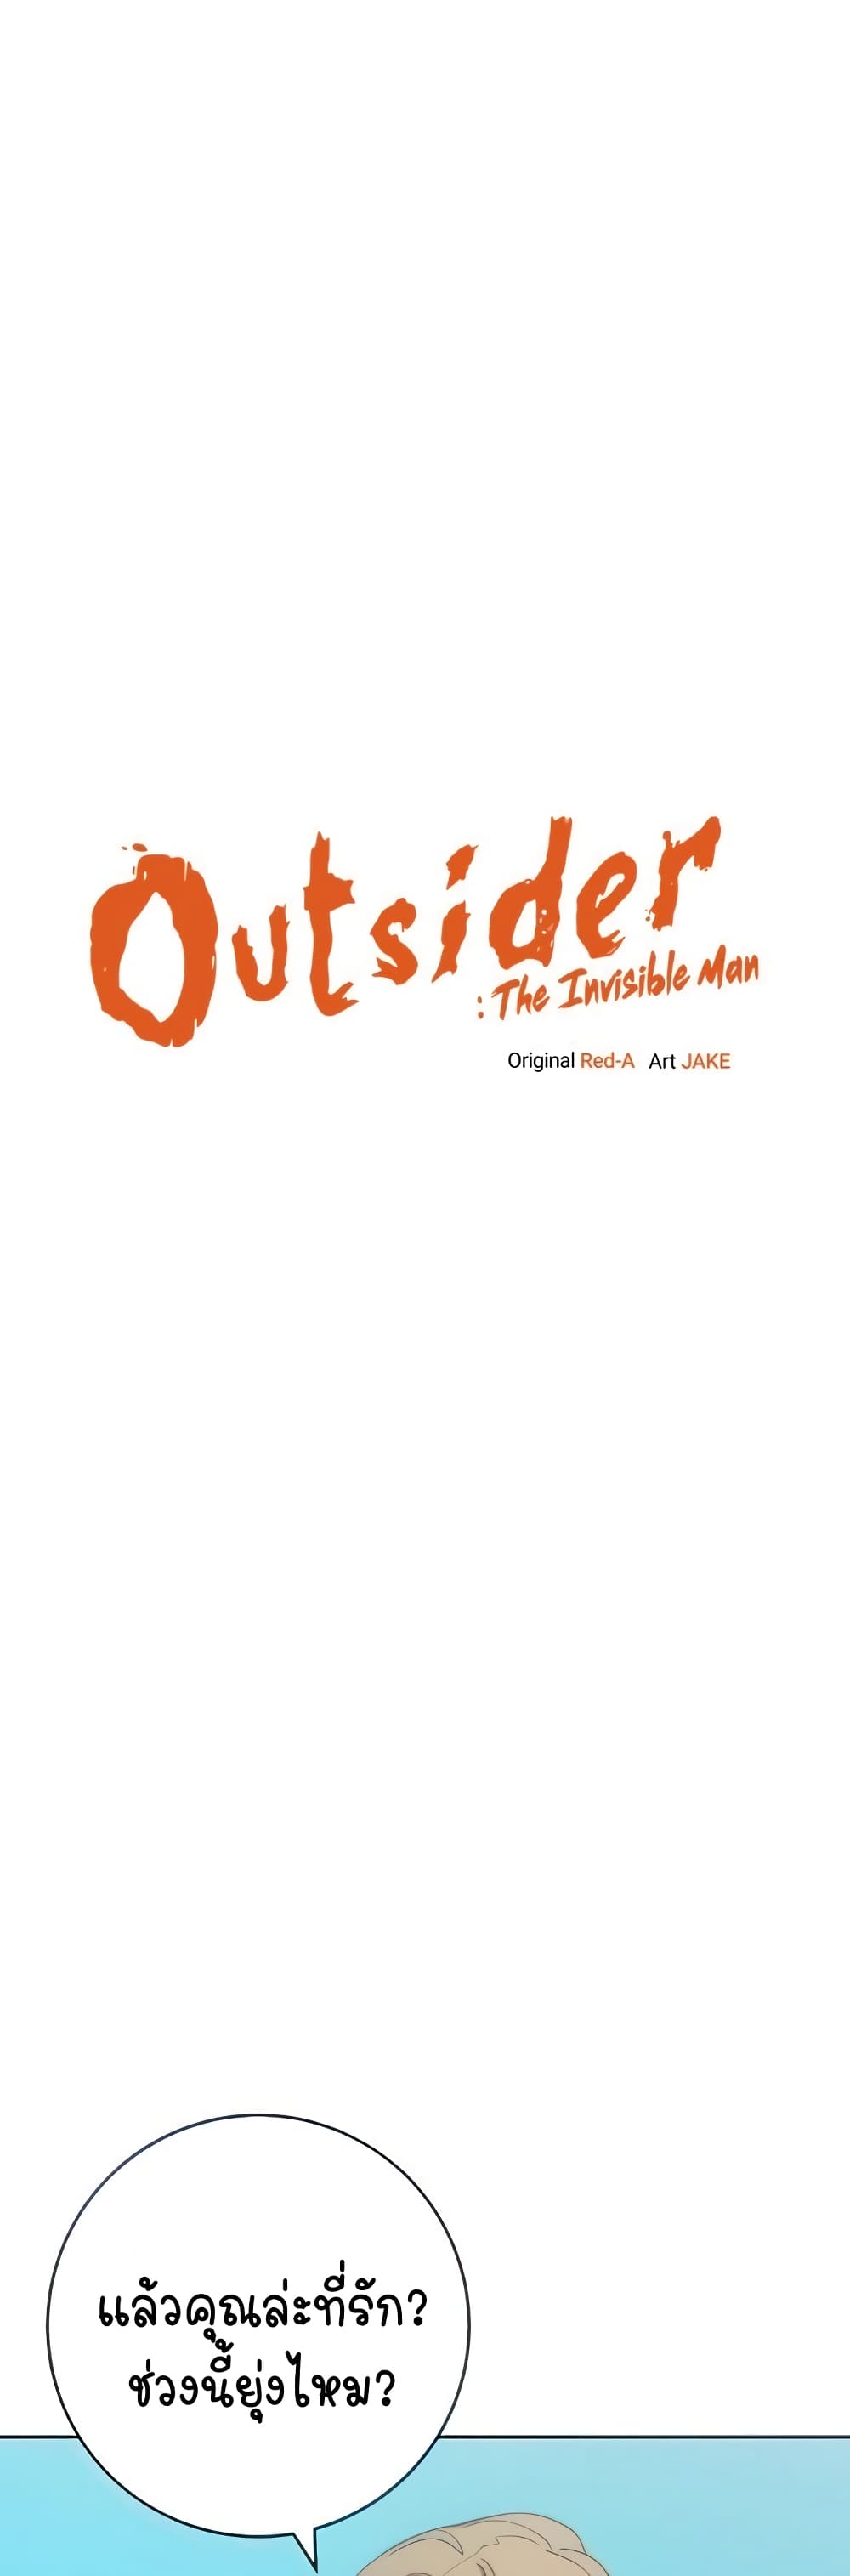 Outsider: The Invisible Man 12-12